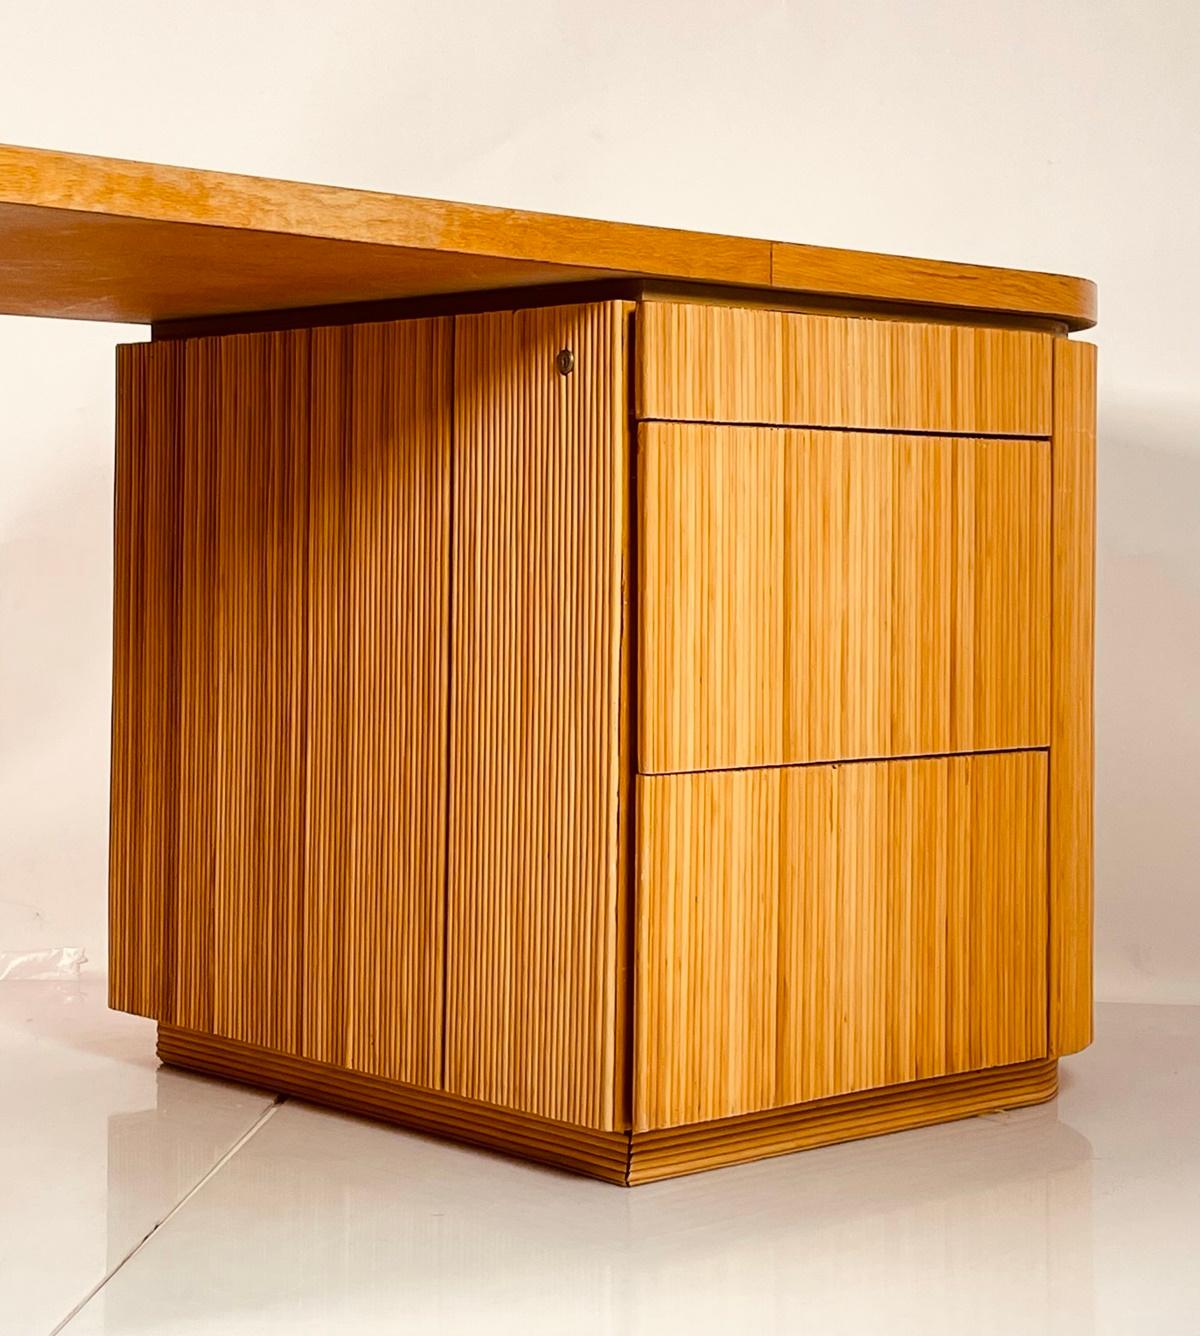 Pencil Reed Executive Desk in the Style of Karl Springer, USA 1970's For Sale 8